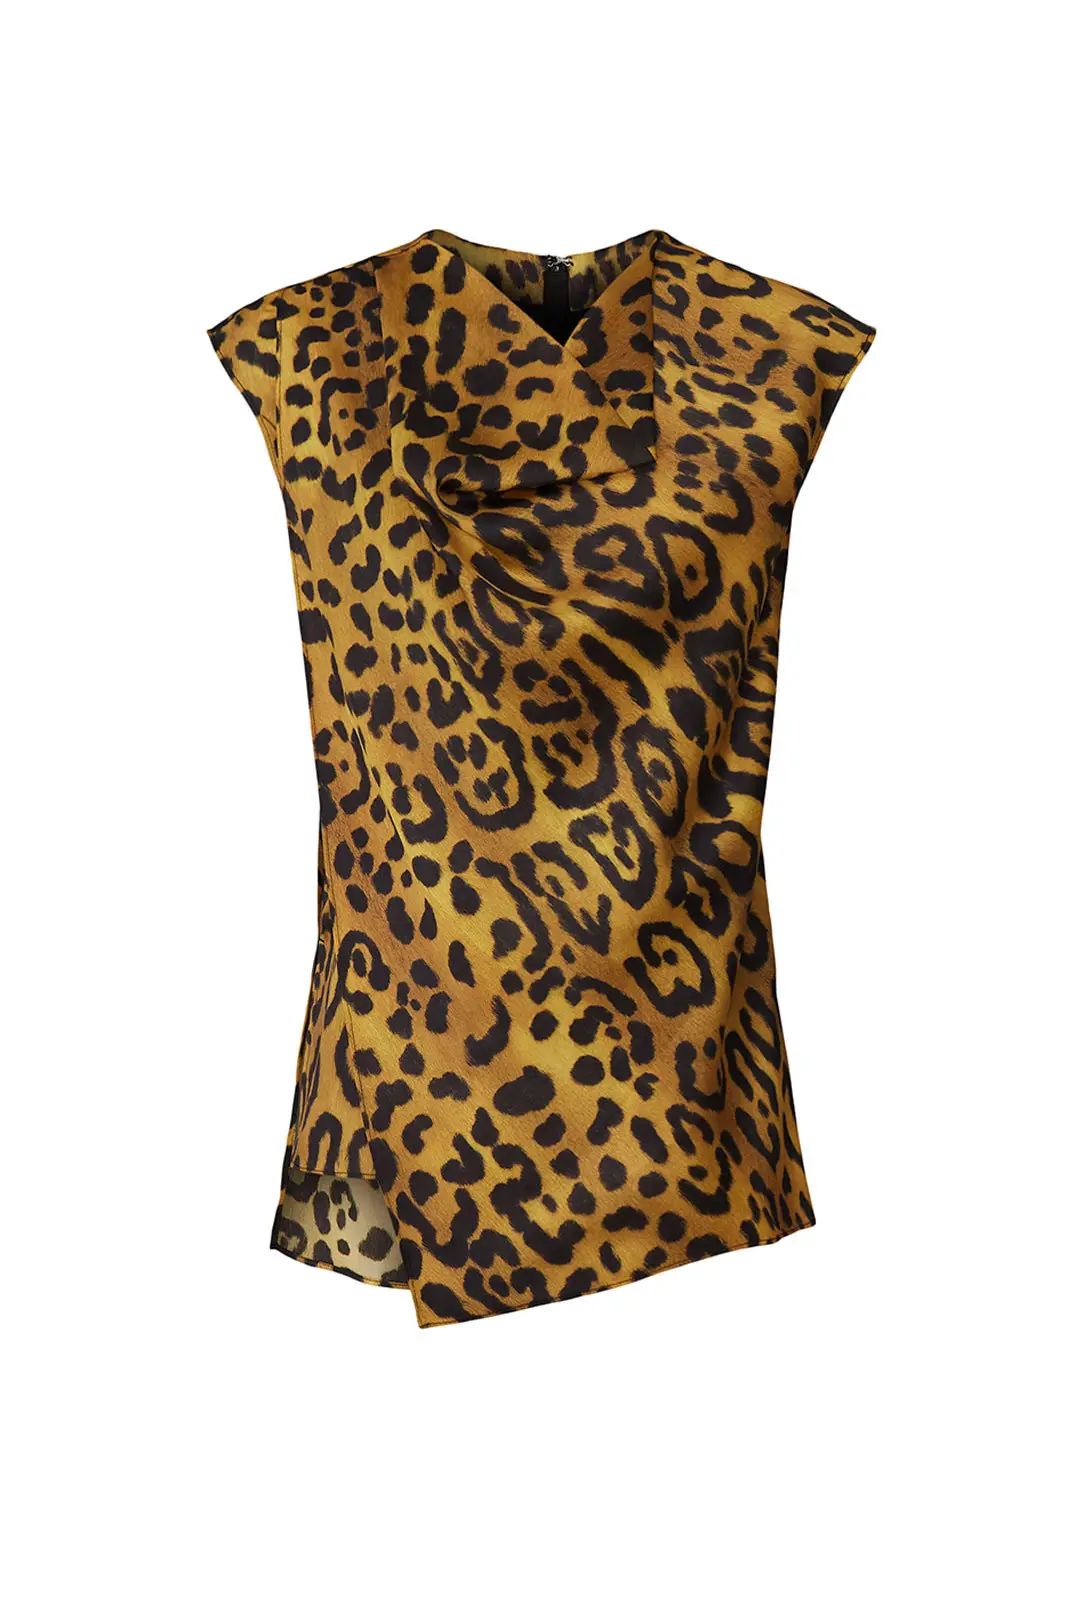 Adam Lippes Collective Leopard Cowl Neck Top | Rent the Runway